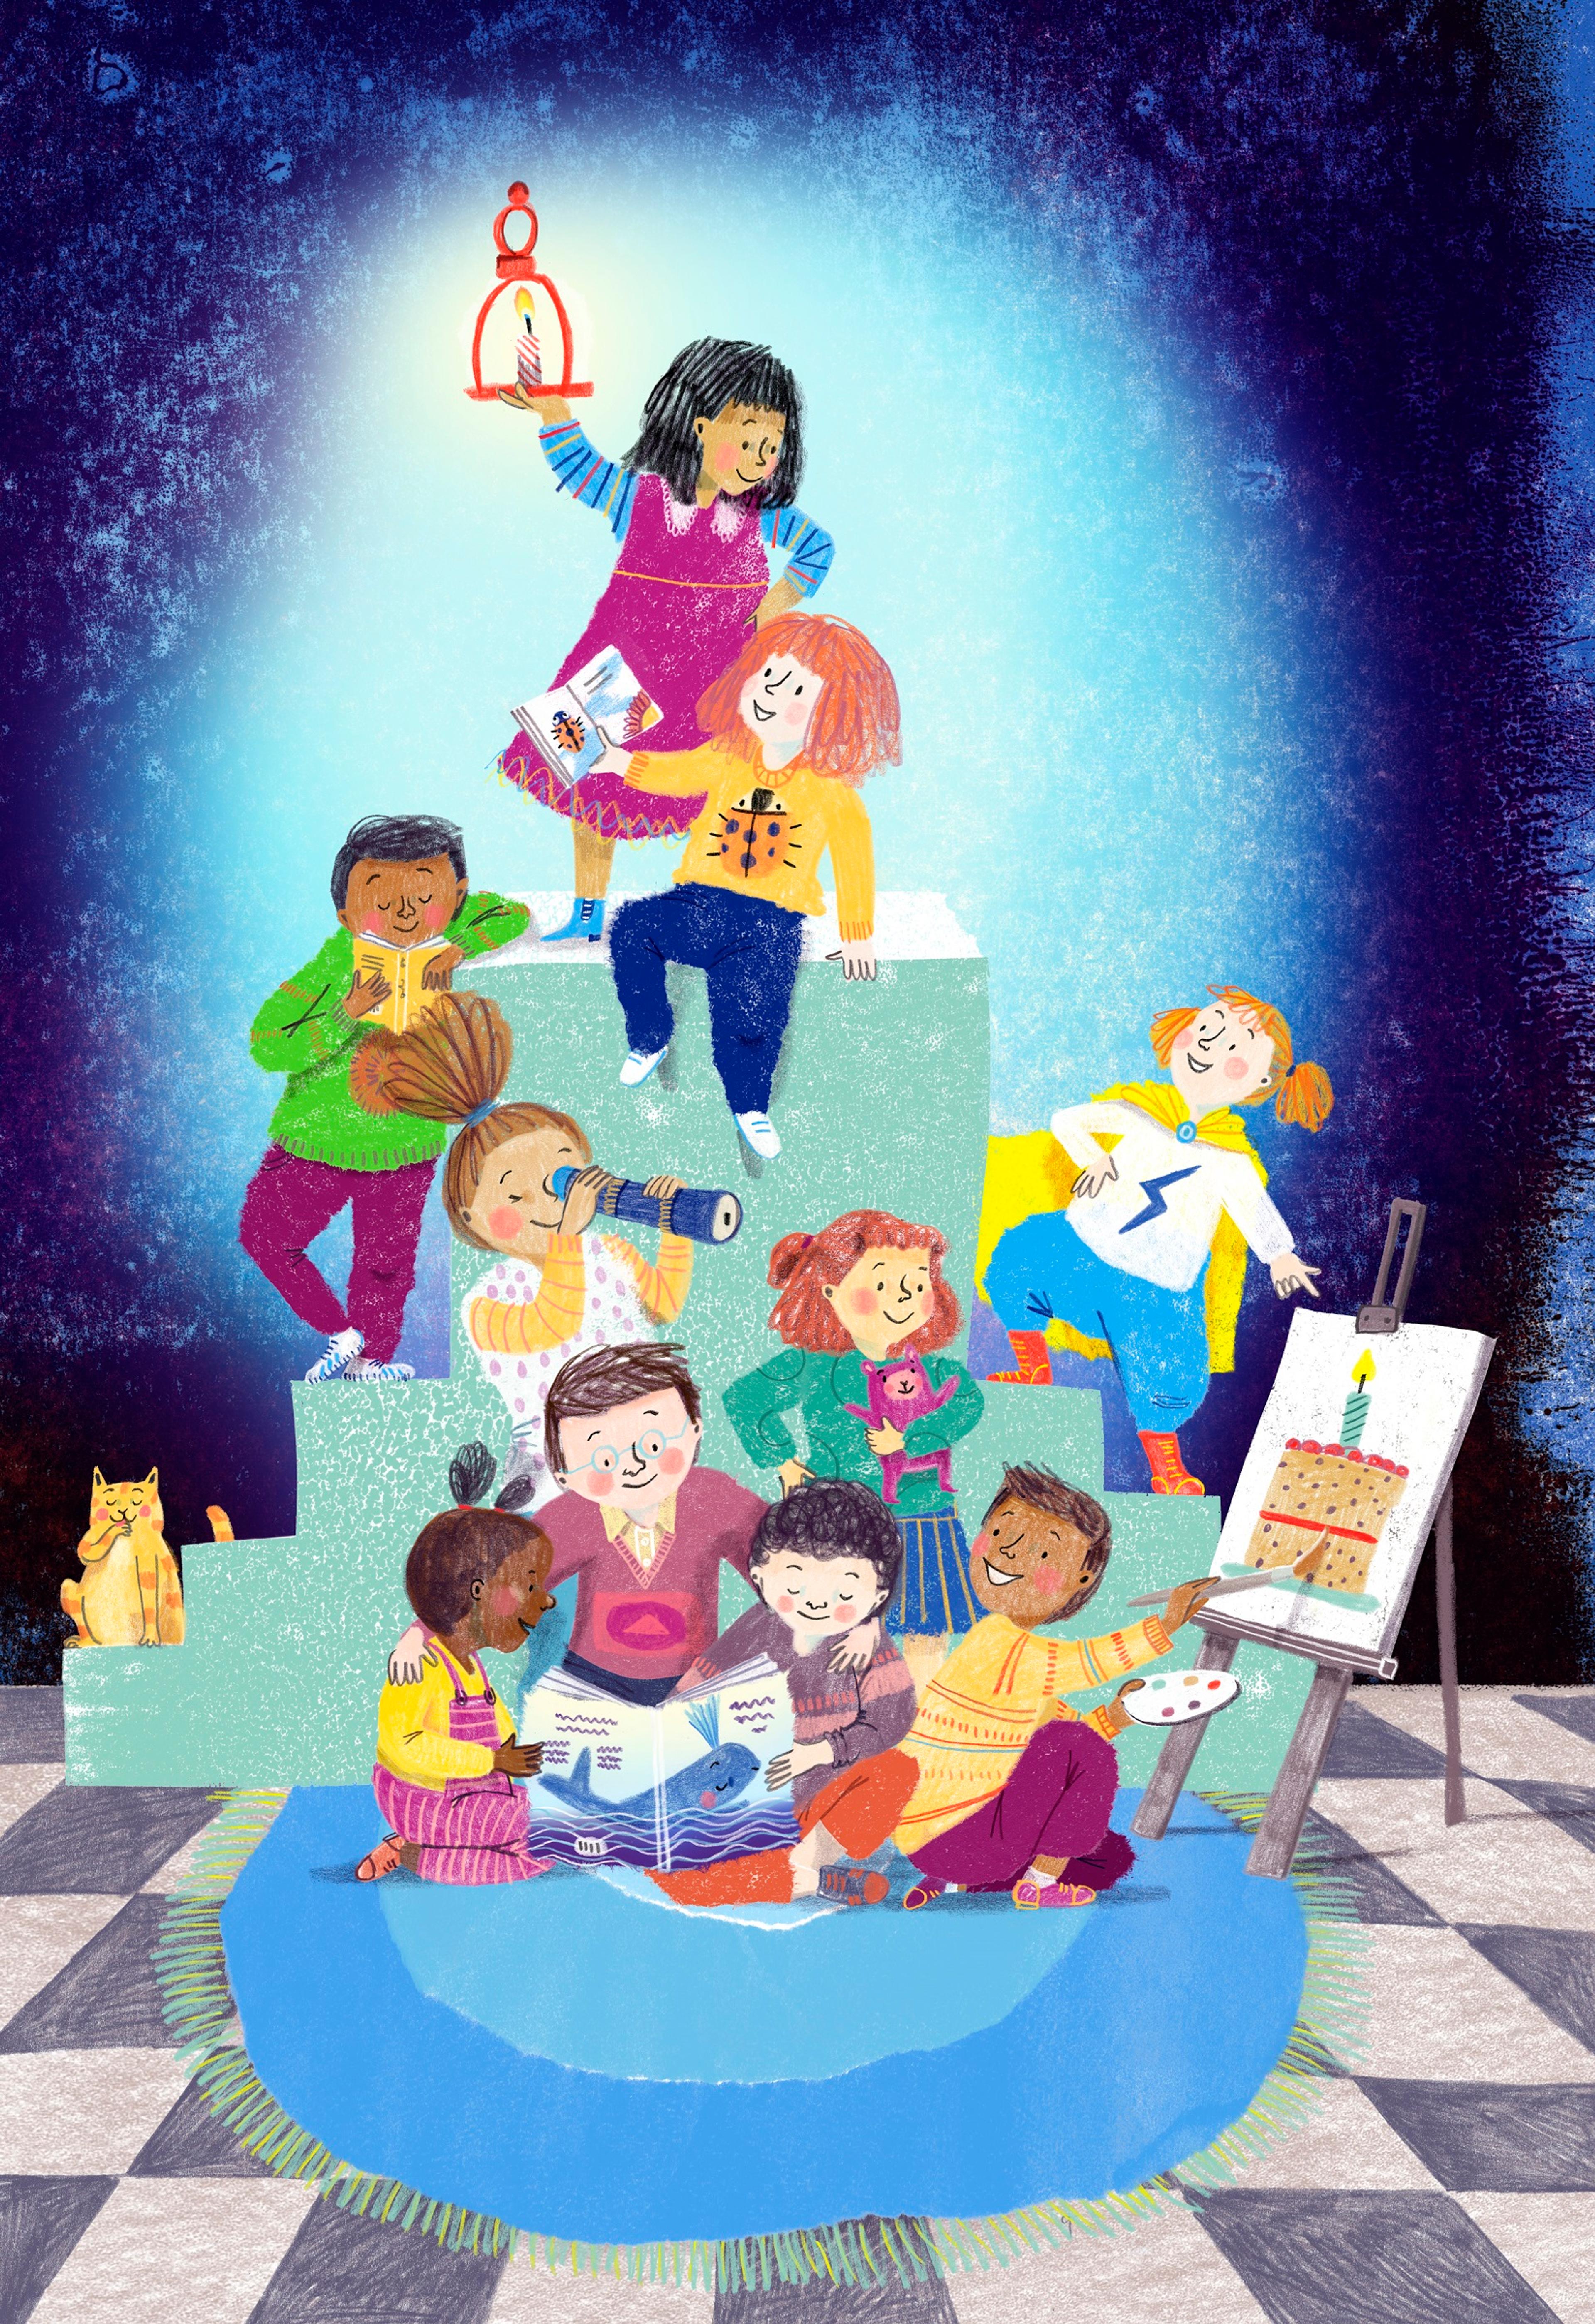 Illustration of a group of children, one at the top of a staircase holding up a candle, another painting a birthday cake